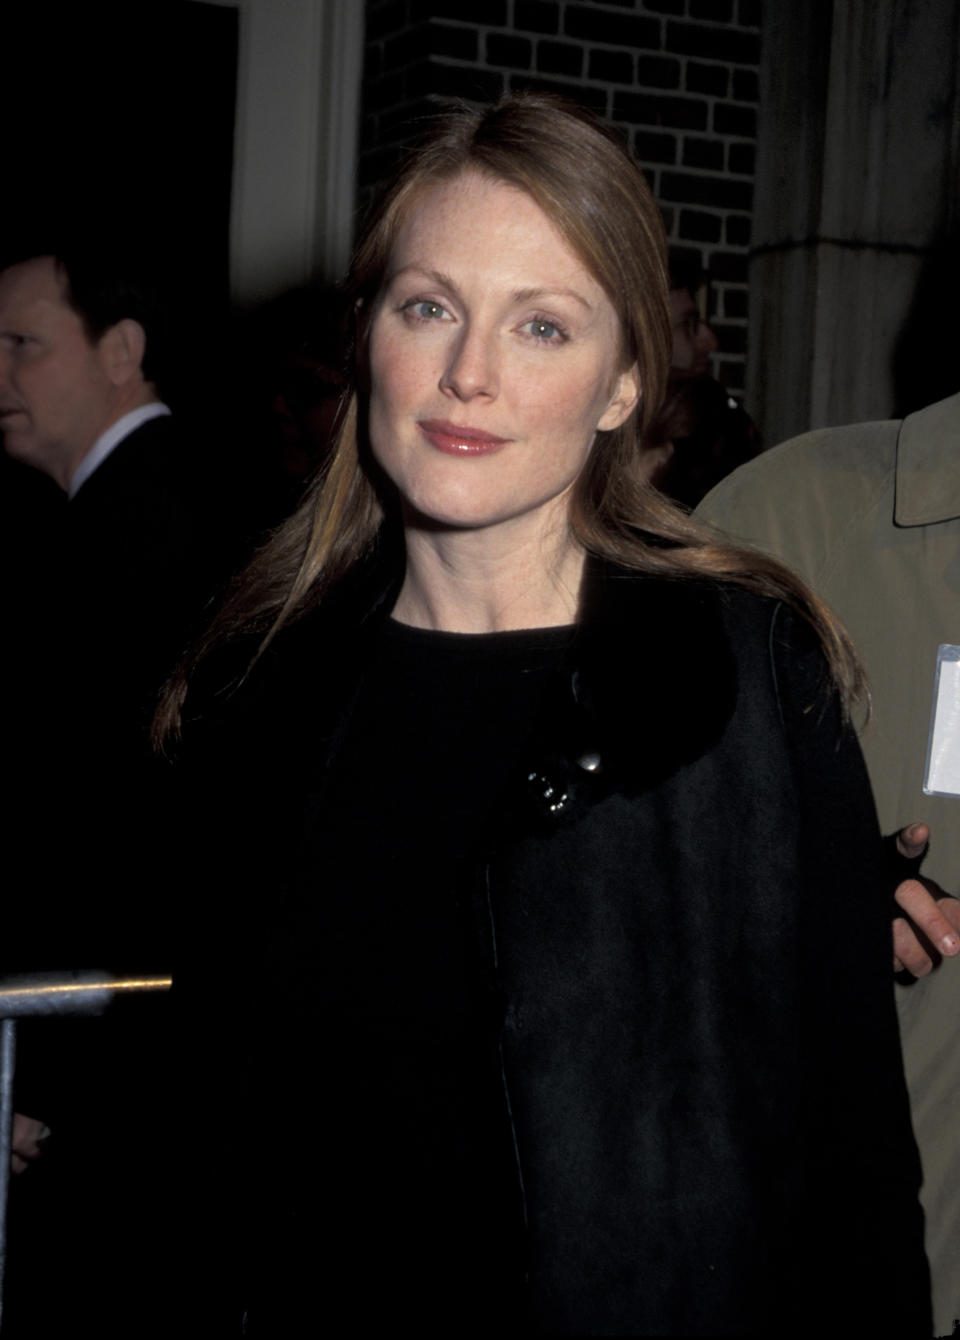 Julianne Moore at an event wearing a black coat with a brooch